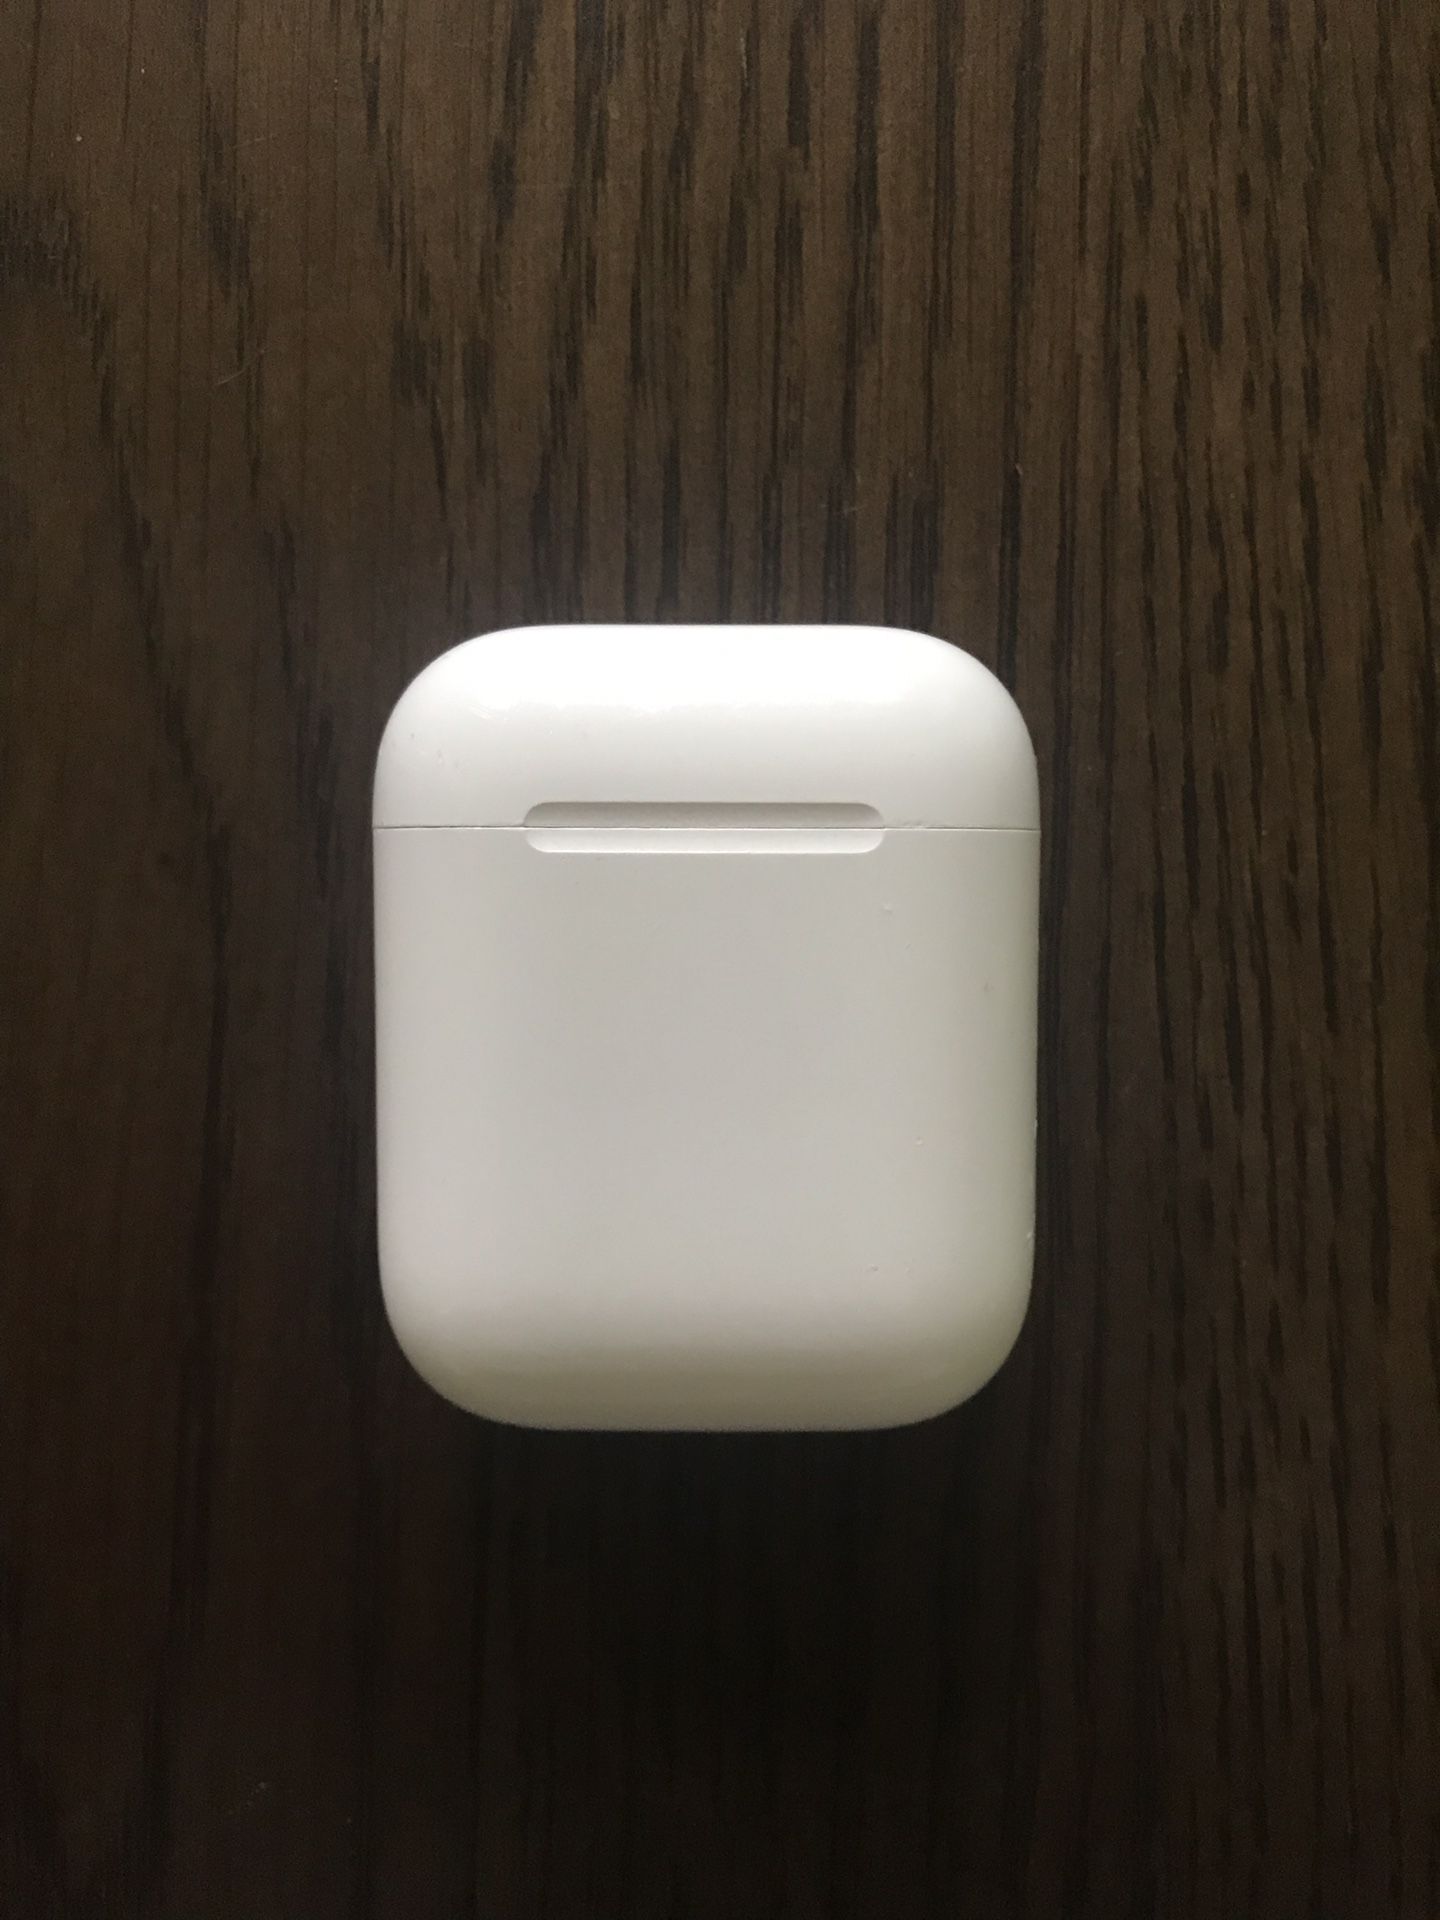 Apple AirPods Wireless Earbuds Case - 1st Generation (only Case / Empty)